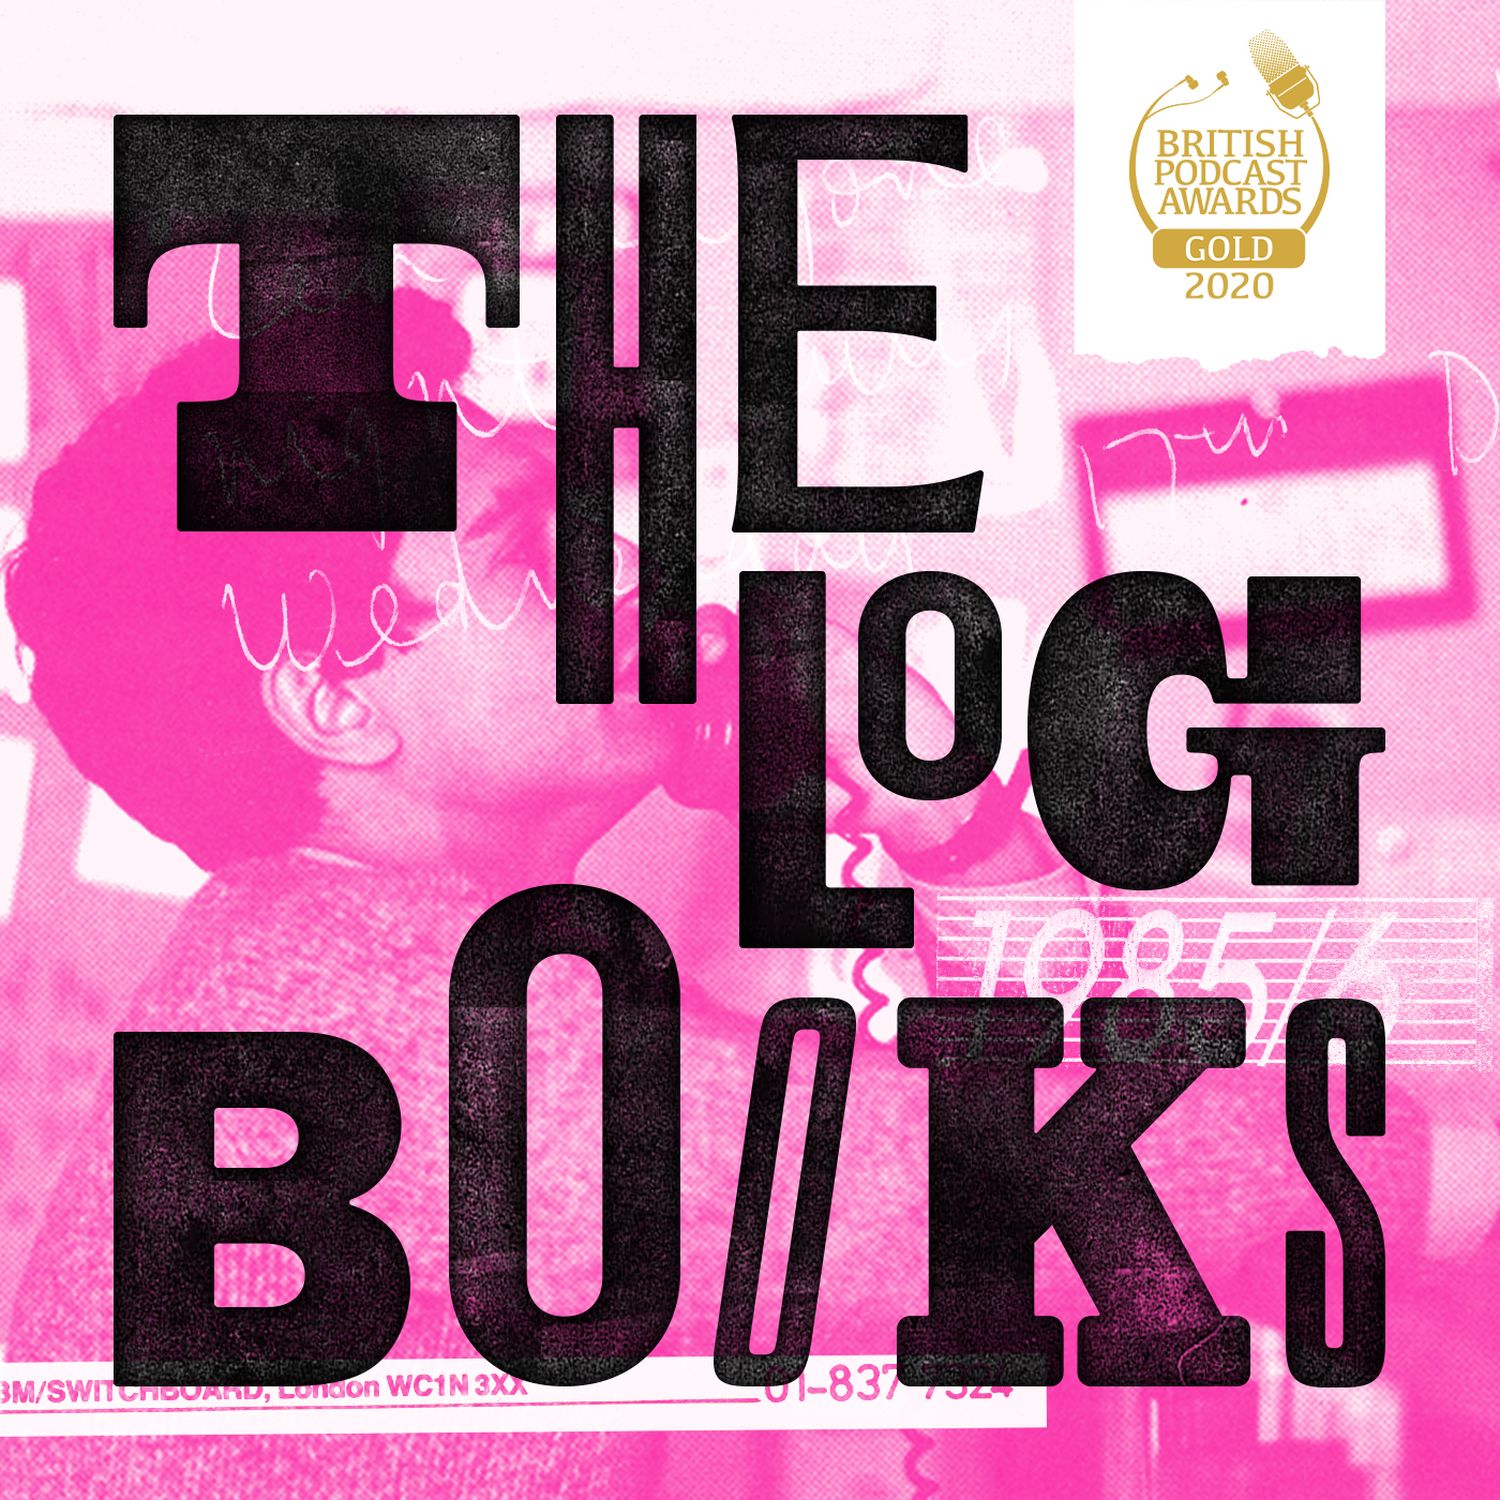 The text "THE LOG BOOKS" in different typefaces overlays a pink image